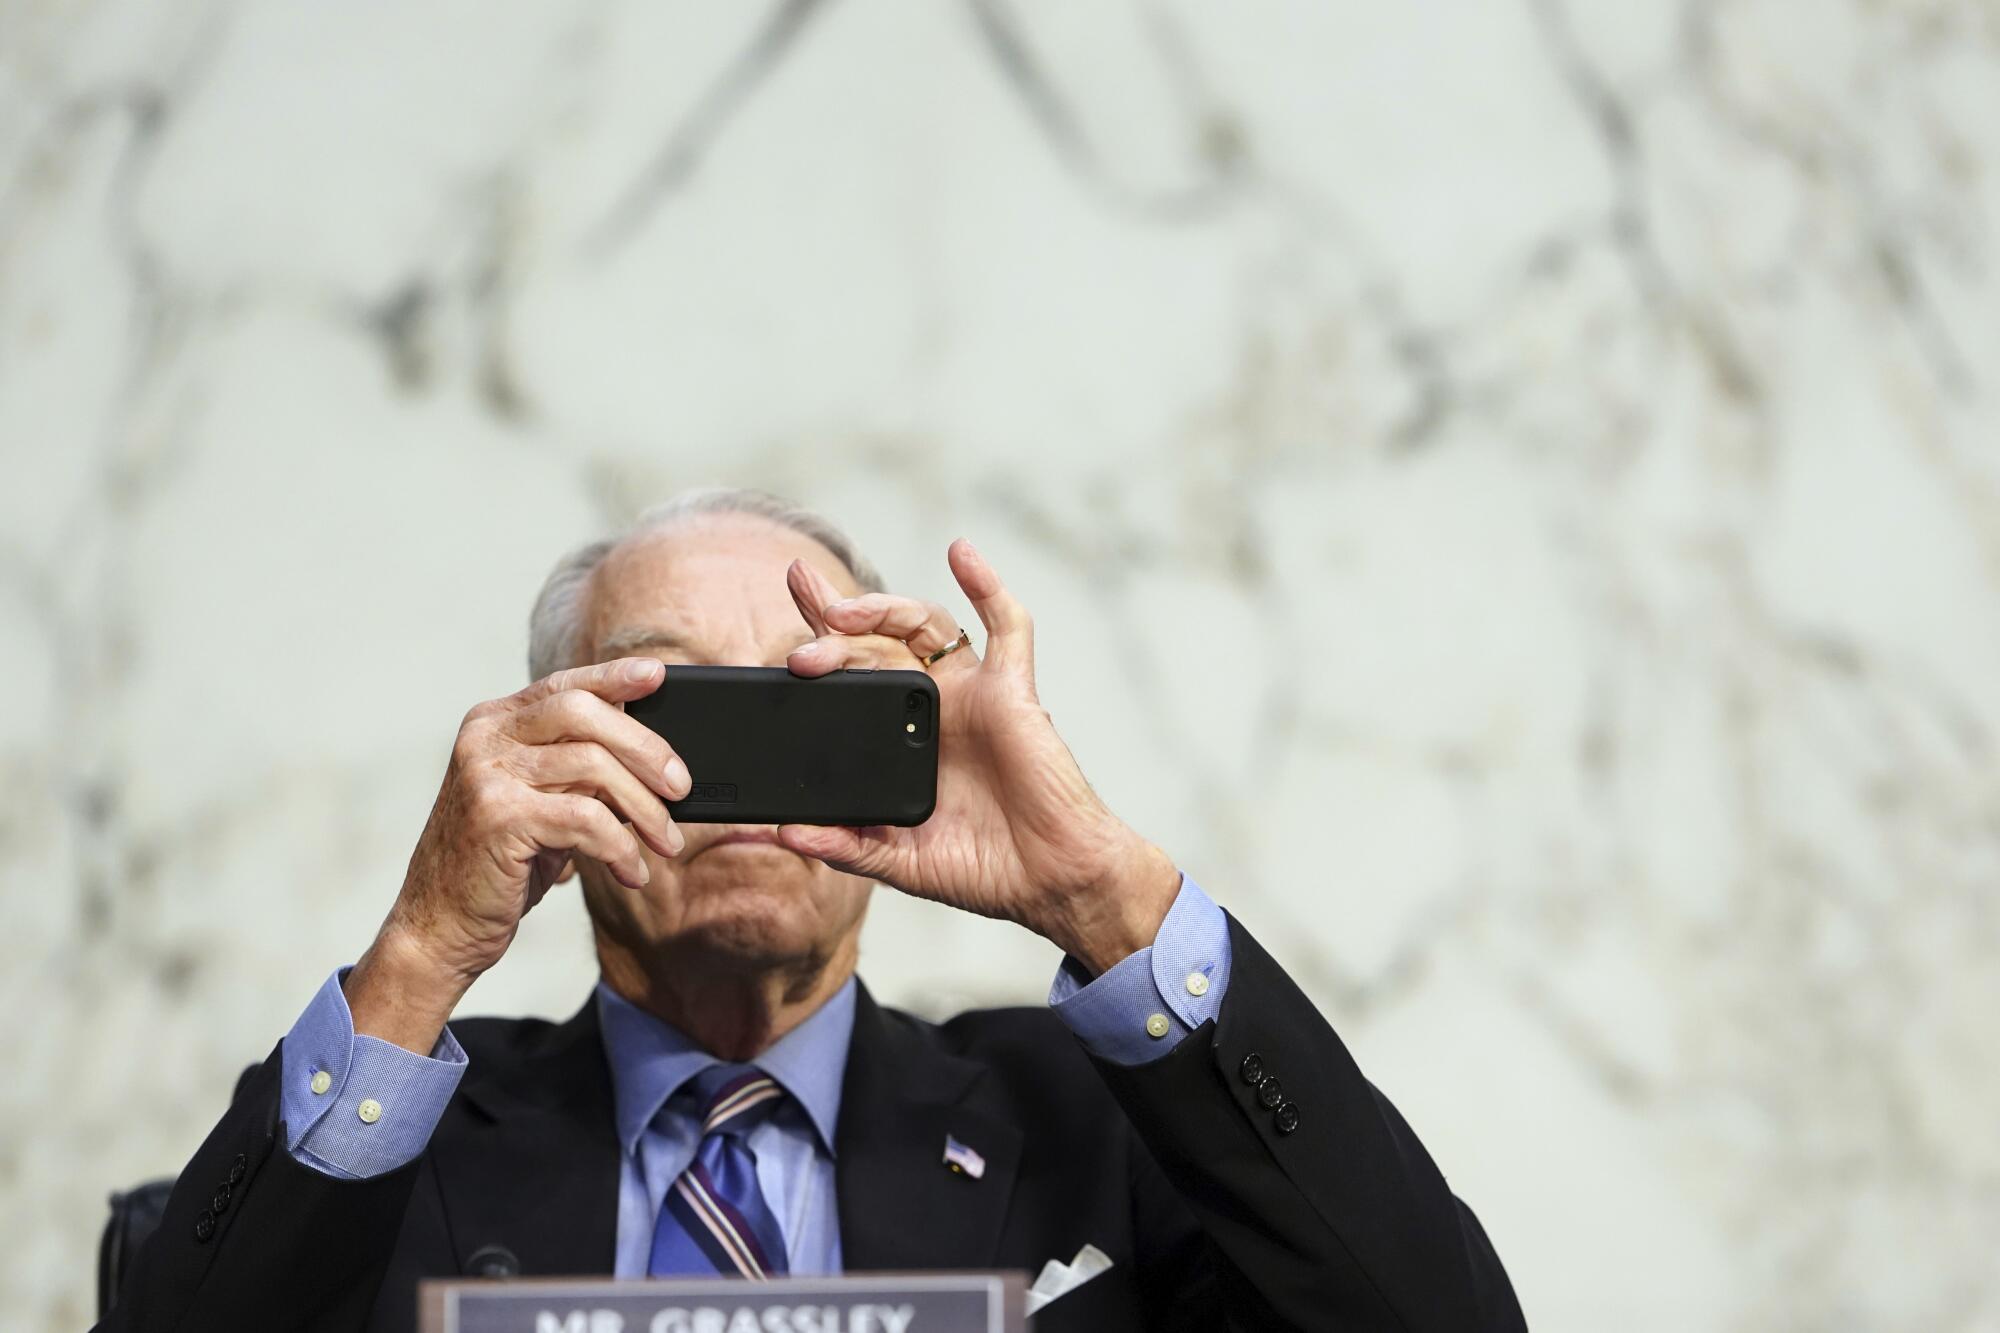 Sen. Charles Grassley appears to be taking a photo with his phone before the hearing.